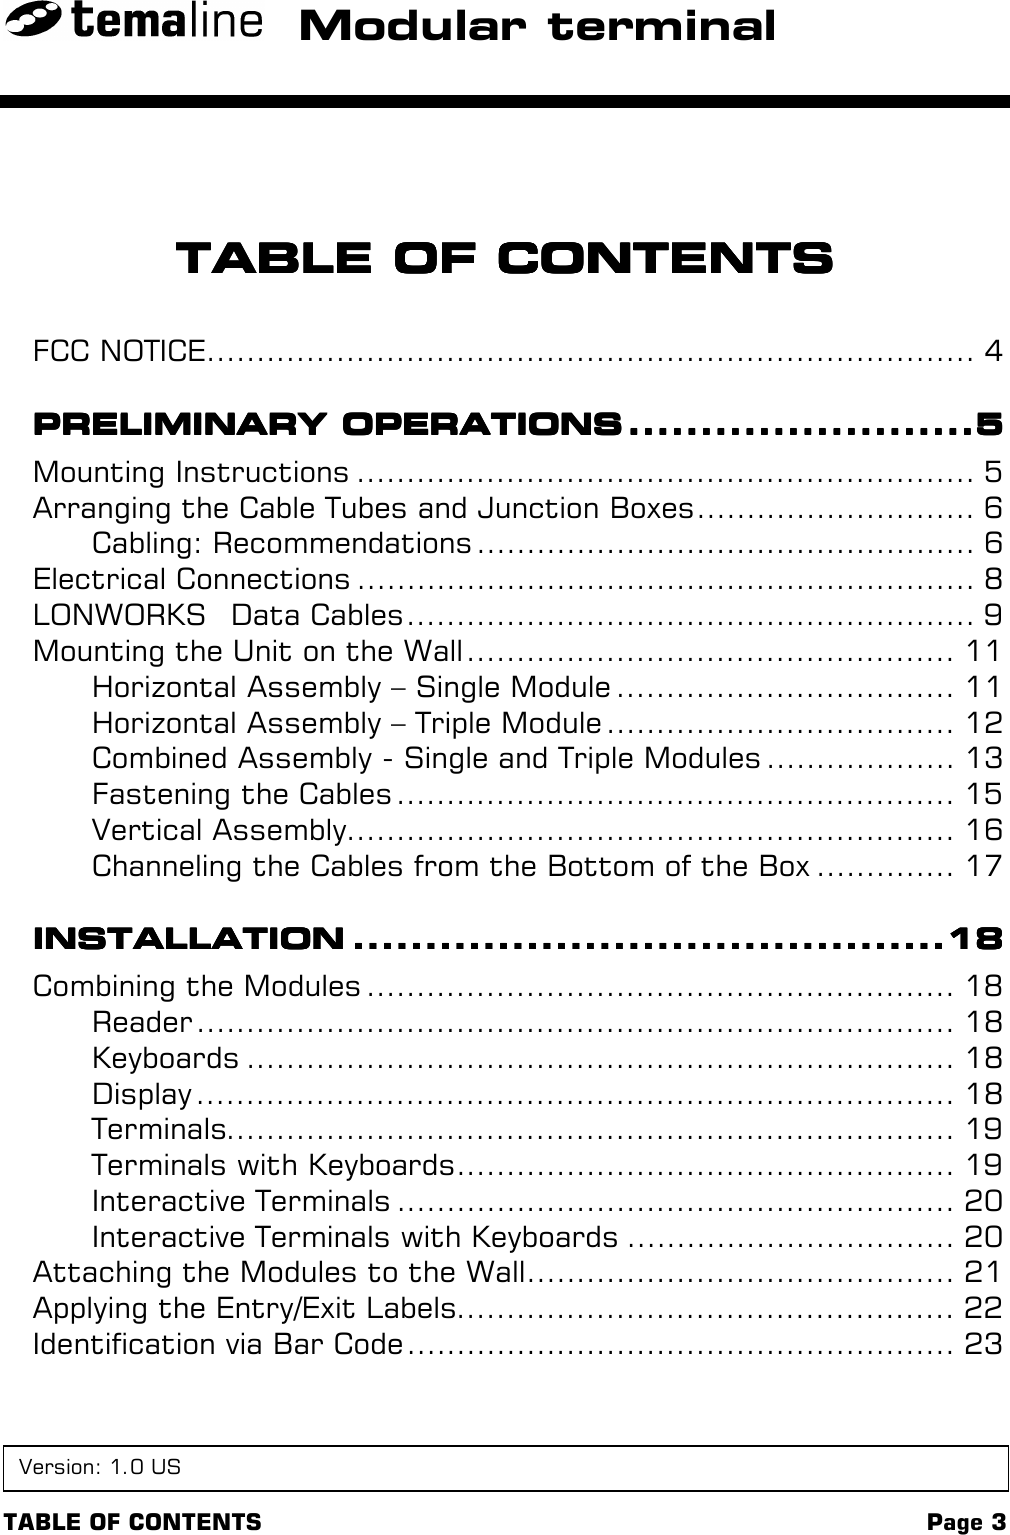 TABLE OF CONTENTS Page 3Modular terminalTABLE OF CONTENTSTABLE OF CONTENTSTABLE OF CONTENTSTABLE OF CONTENTSFCC NOTICE............................................................................. 4PRELIMINARY OPERATIONSPRELIMINARY OPERATIONSPRELIMINARY OPERATIONSPRELIMINARY OPERATIONS ................................................................................................5555Mounting Instructions .............................................................. 5Arranging the Cable Tubes and Junction Boxes............................ 6Cabling: Recommendations .................................................. 6Electrical Connections .............................................................. 8LONWORKS  Data Cables......................................................... 9Mounting the Unit on the Wall ................................................. 11Horizontal Assembly – Single Module .................................. 11Horizontal Assembly – Triple Module ................................... 12Combined Assembly - Single and Triple Modules ................... 13Fastening the Cables ........................................................ 15Vertical Assembly............................................................. 16Channeling the Cables from the Bottom of the Box .............. 17INSTALLATIONINSTALLATIONINSTALLATIONINSTALLATION ....................................................................................................................................................................18181818Combining the Modules ........................................................... 18Reader ............................................................................ 18Keyboards ....................................................................... 18Display ............................................................................ 18Terminals......................................................................... 19Terminals with Keyboards.................................................. 19Interactive Terminals ........................................................ 20Interactive Terminals with Keyboards ................................. 20Attaching the Modules to the Wall........................................... 21Applying the Entry/Exit Labels.................................................. 22Identification via Bar Code ....................................................... 23Version: 1.0 US